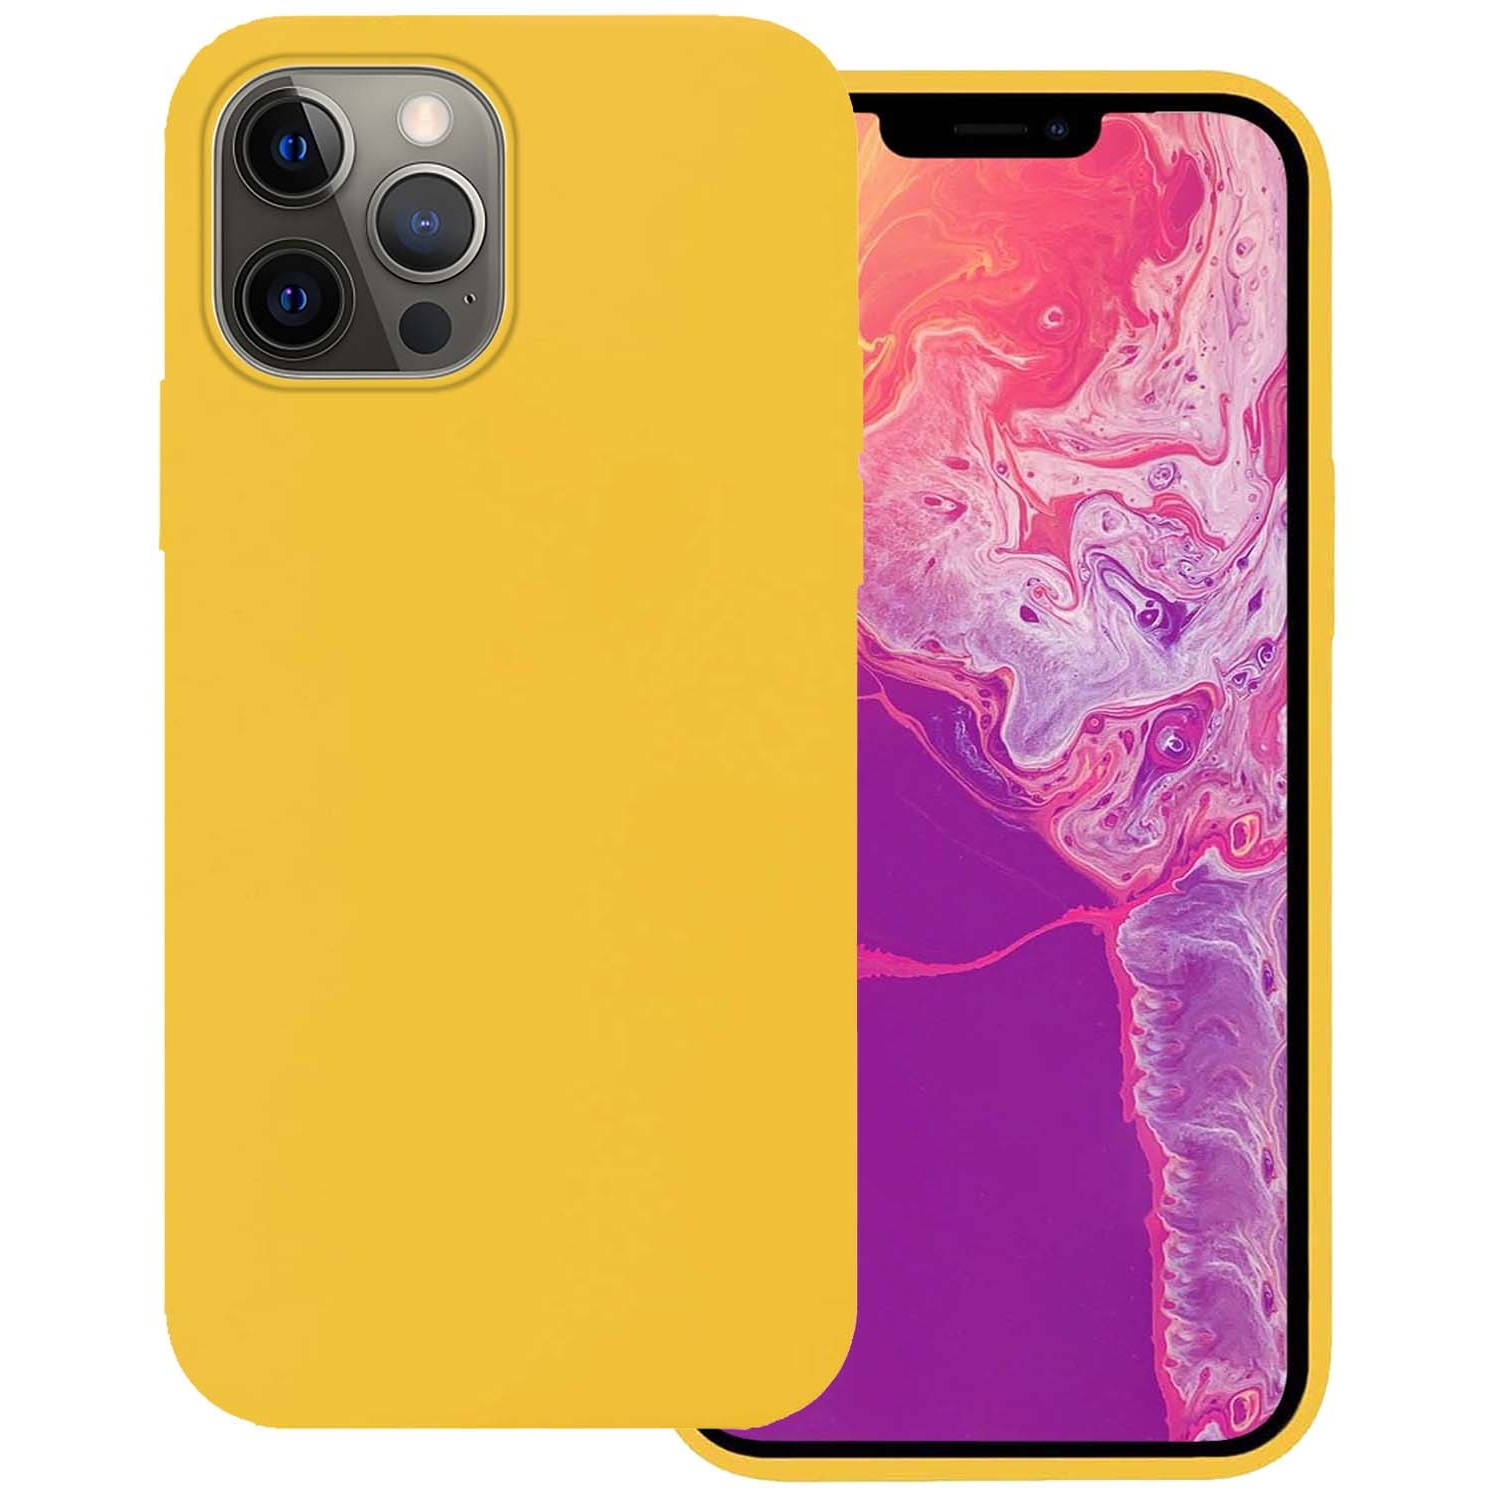 Basey Iphone 13 Pro Hoesje Silicone Case Iphone 13 Pro Case Geel Siliconen Hoes Iphone 13 Pro Hoes C